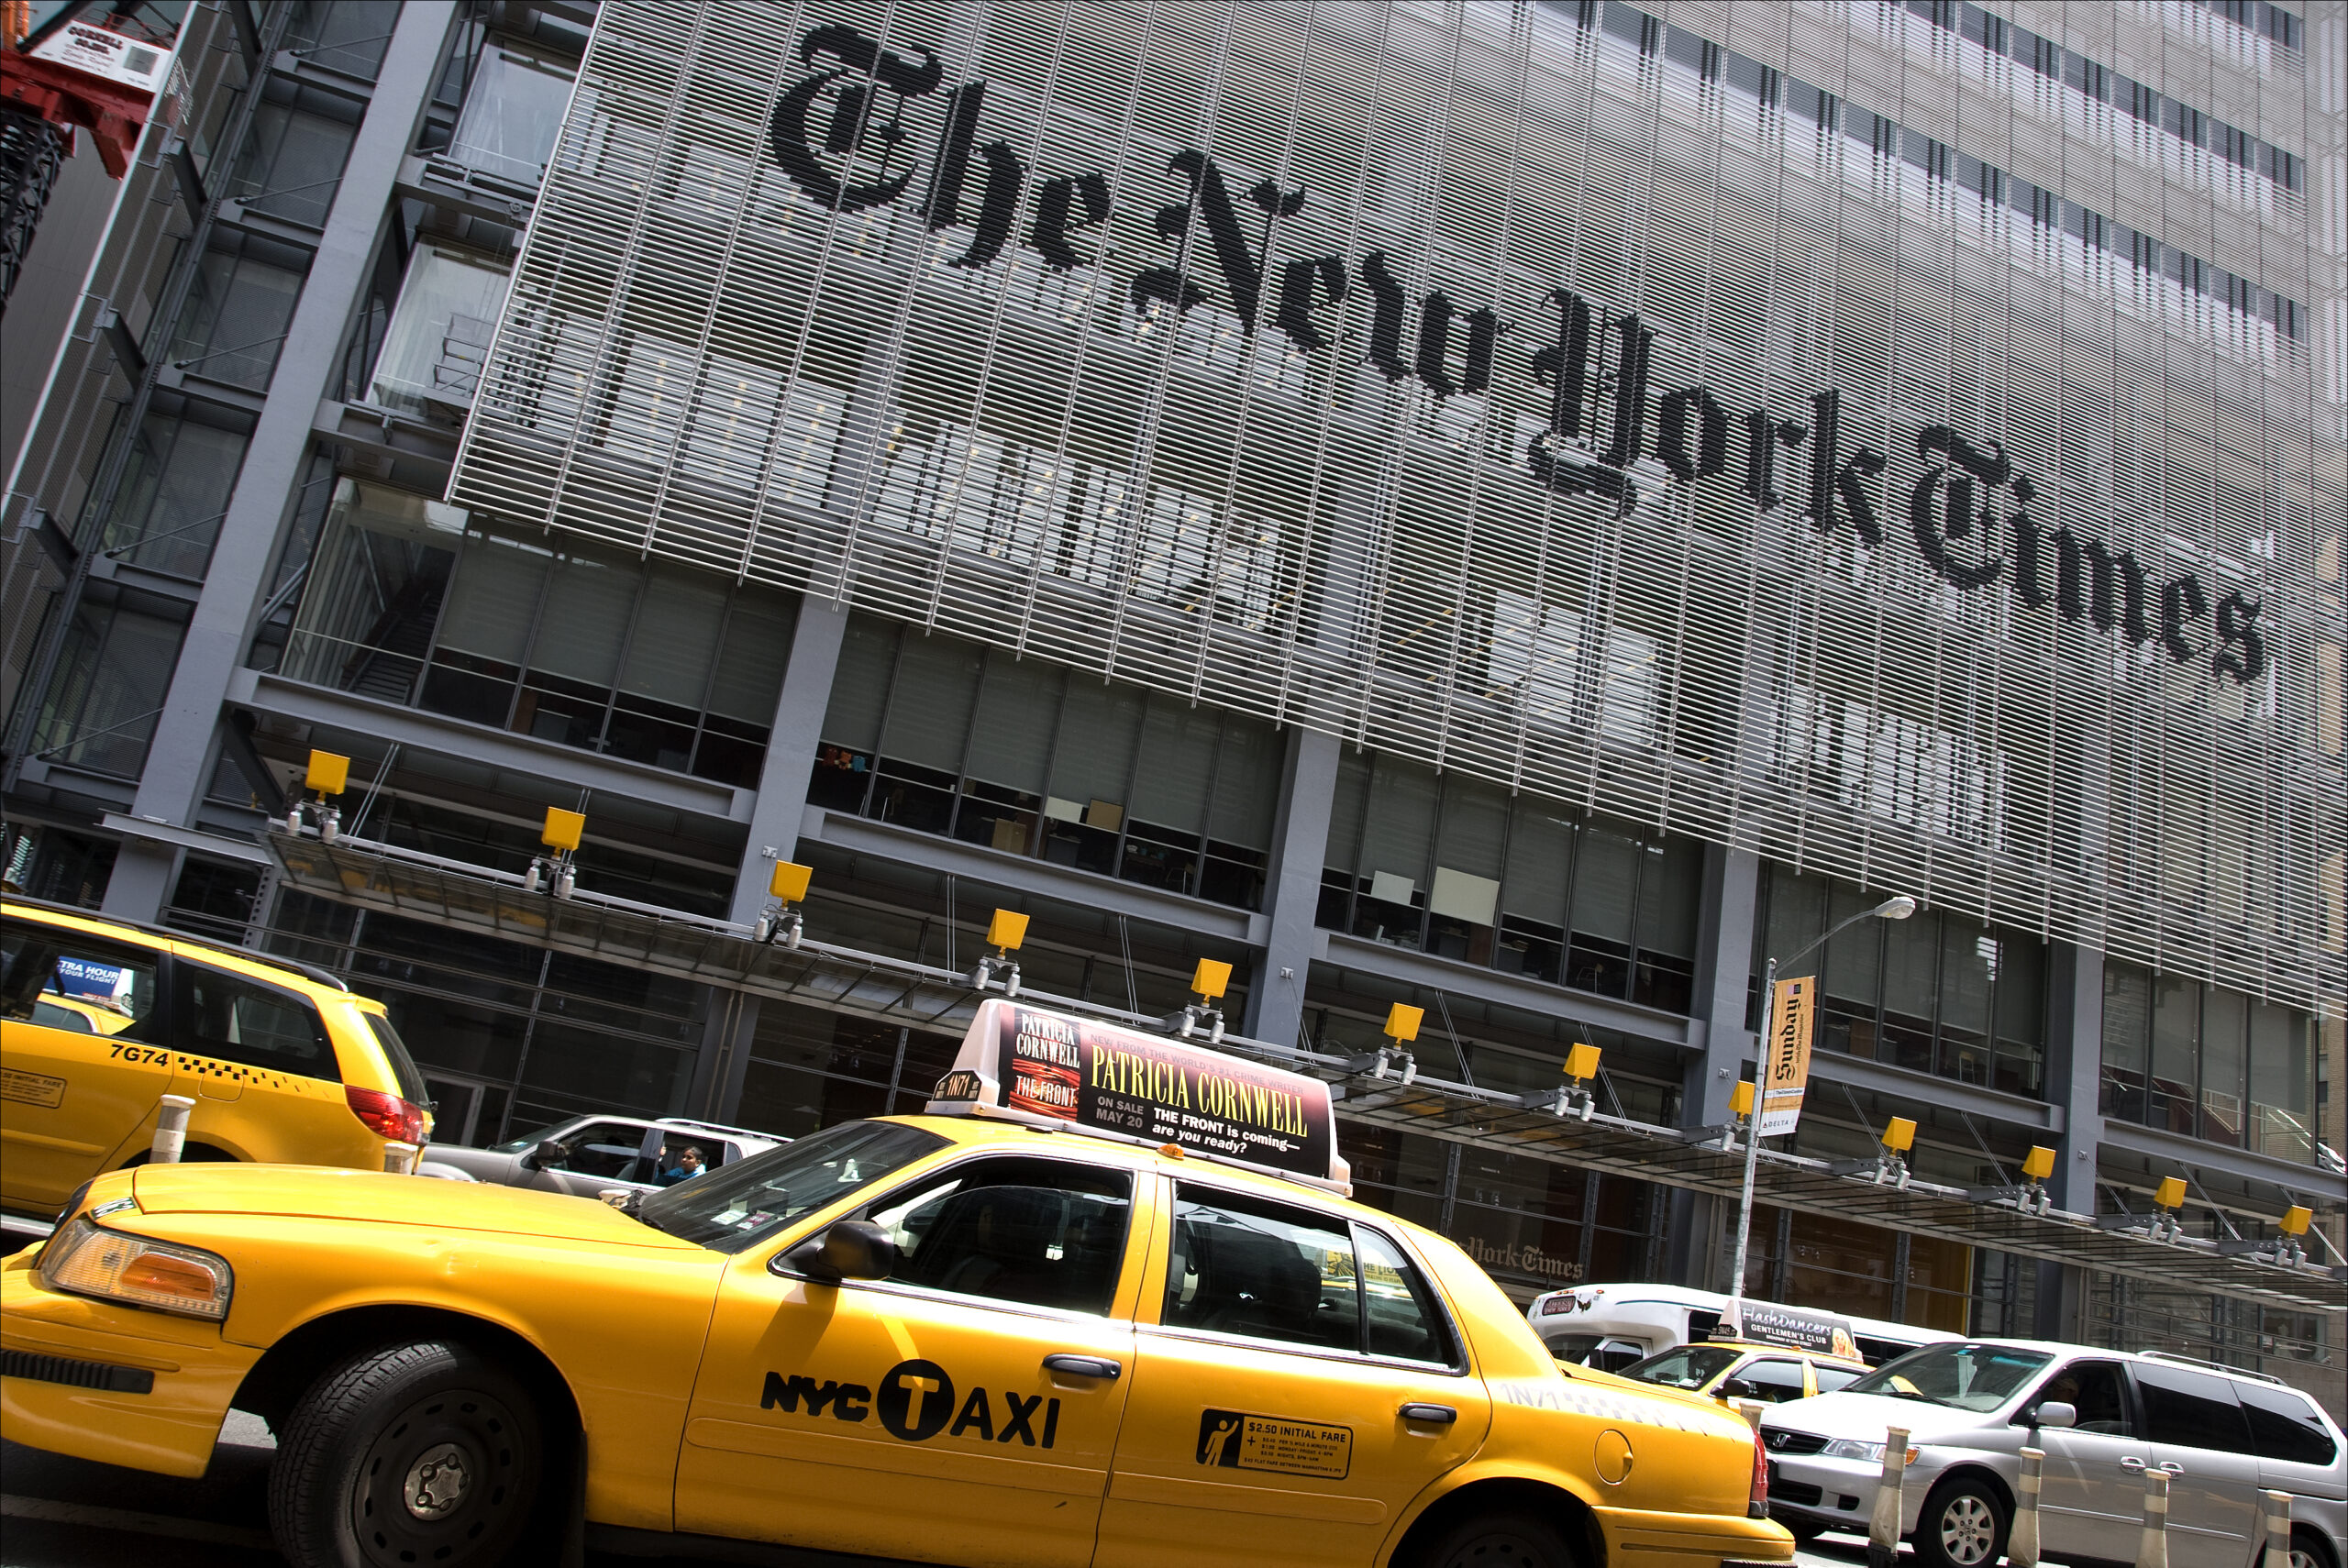 The New York Times Building. (Michal Osmenda, CC BY-SA 2.0, Wikimedia Commons)